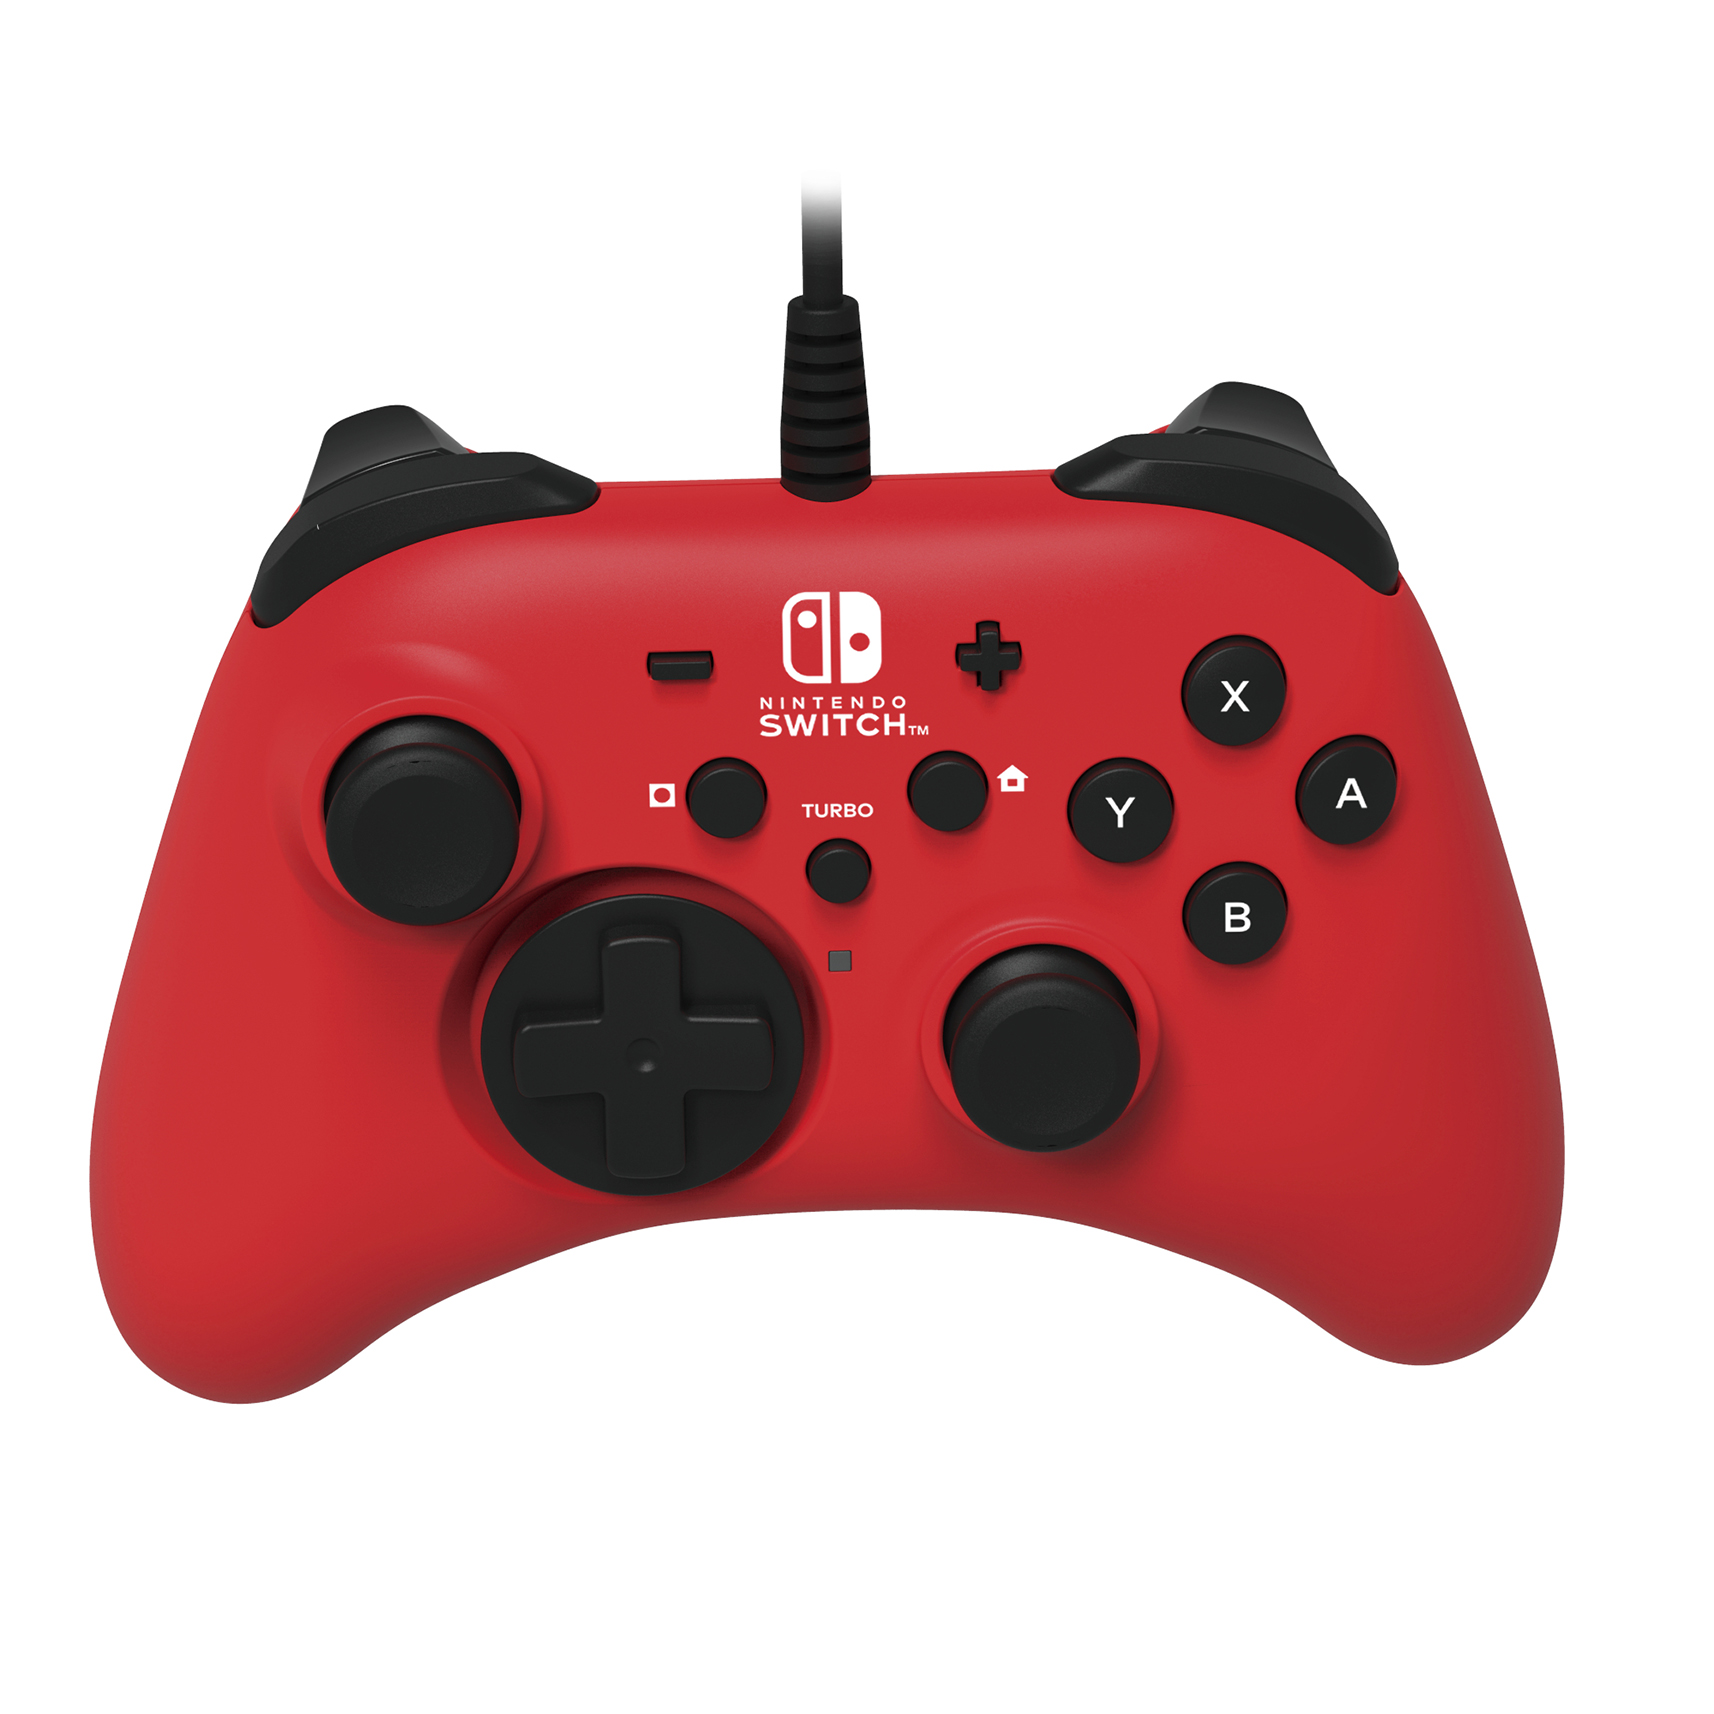 Hori - Red and Black, Nintendo Switch, Hori-Pad Video Game Controller - image 3 of 6